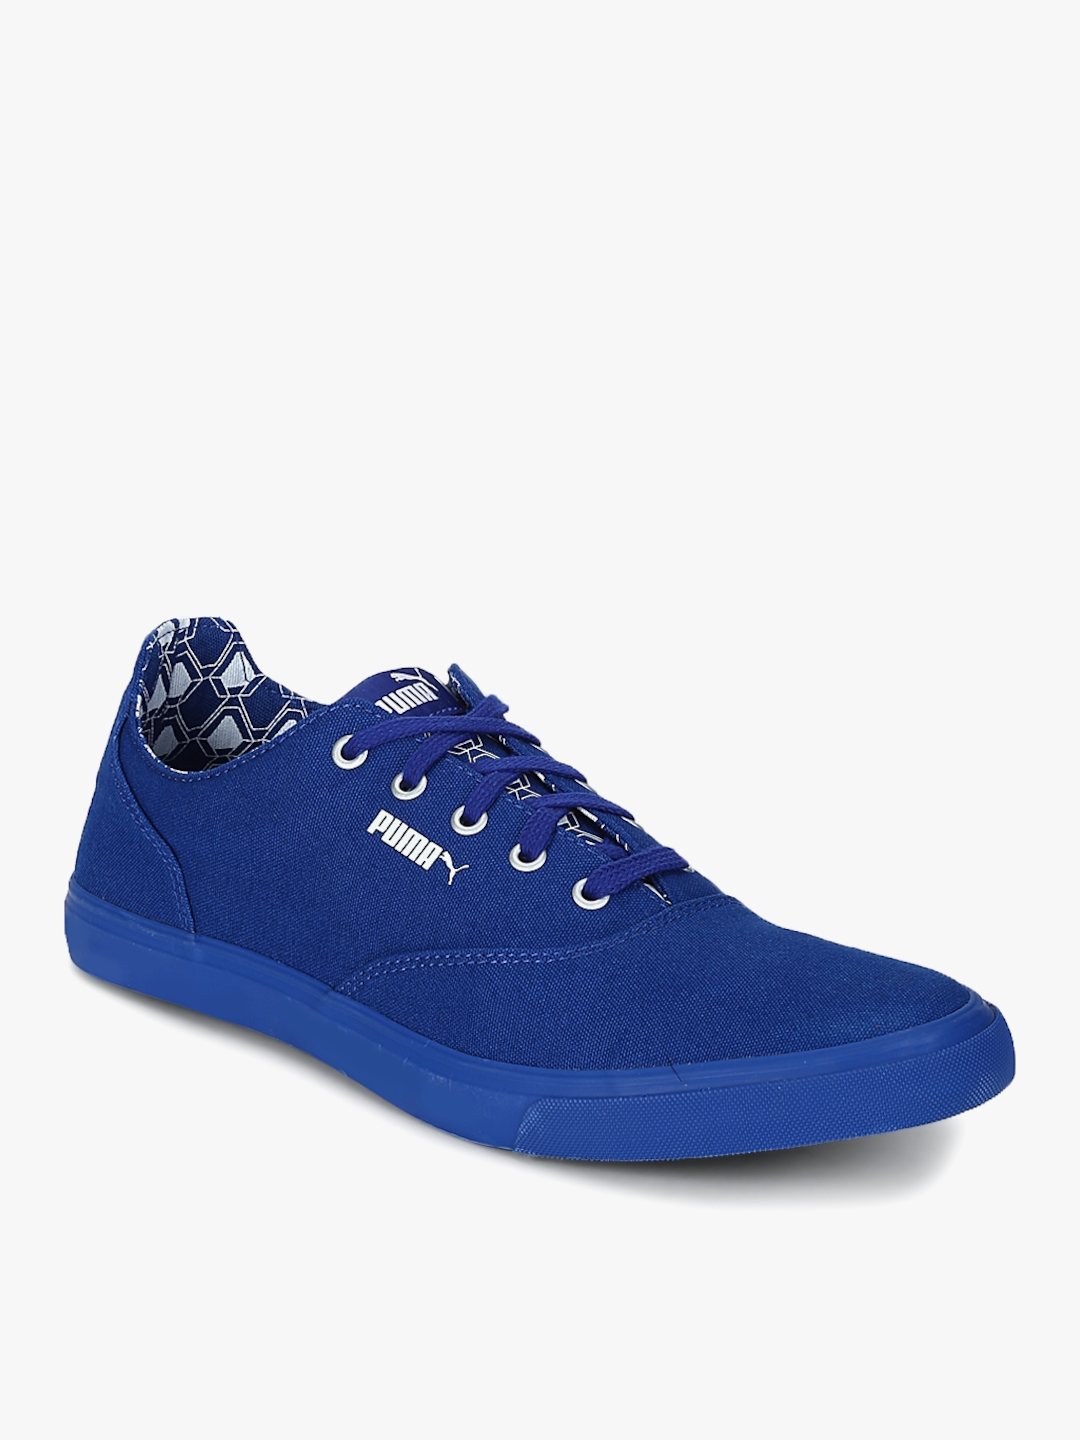 Pop X Idp Blue Sneakers - Casual Shoes 